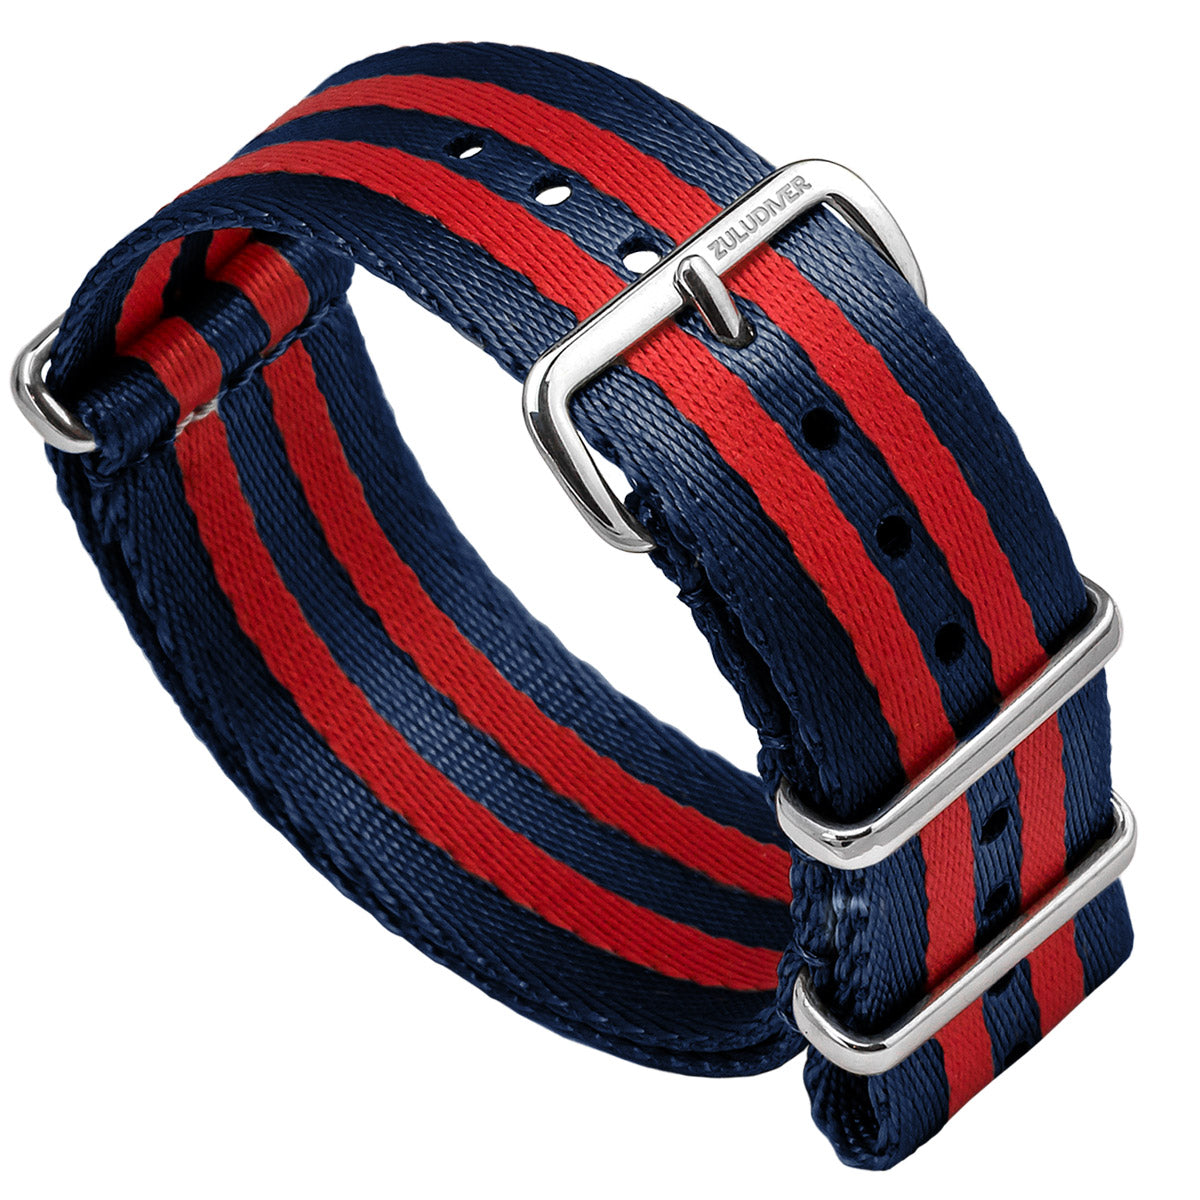 Omega style NATO Watch Straps, blue and red stripe colours, white background image